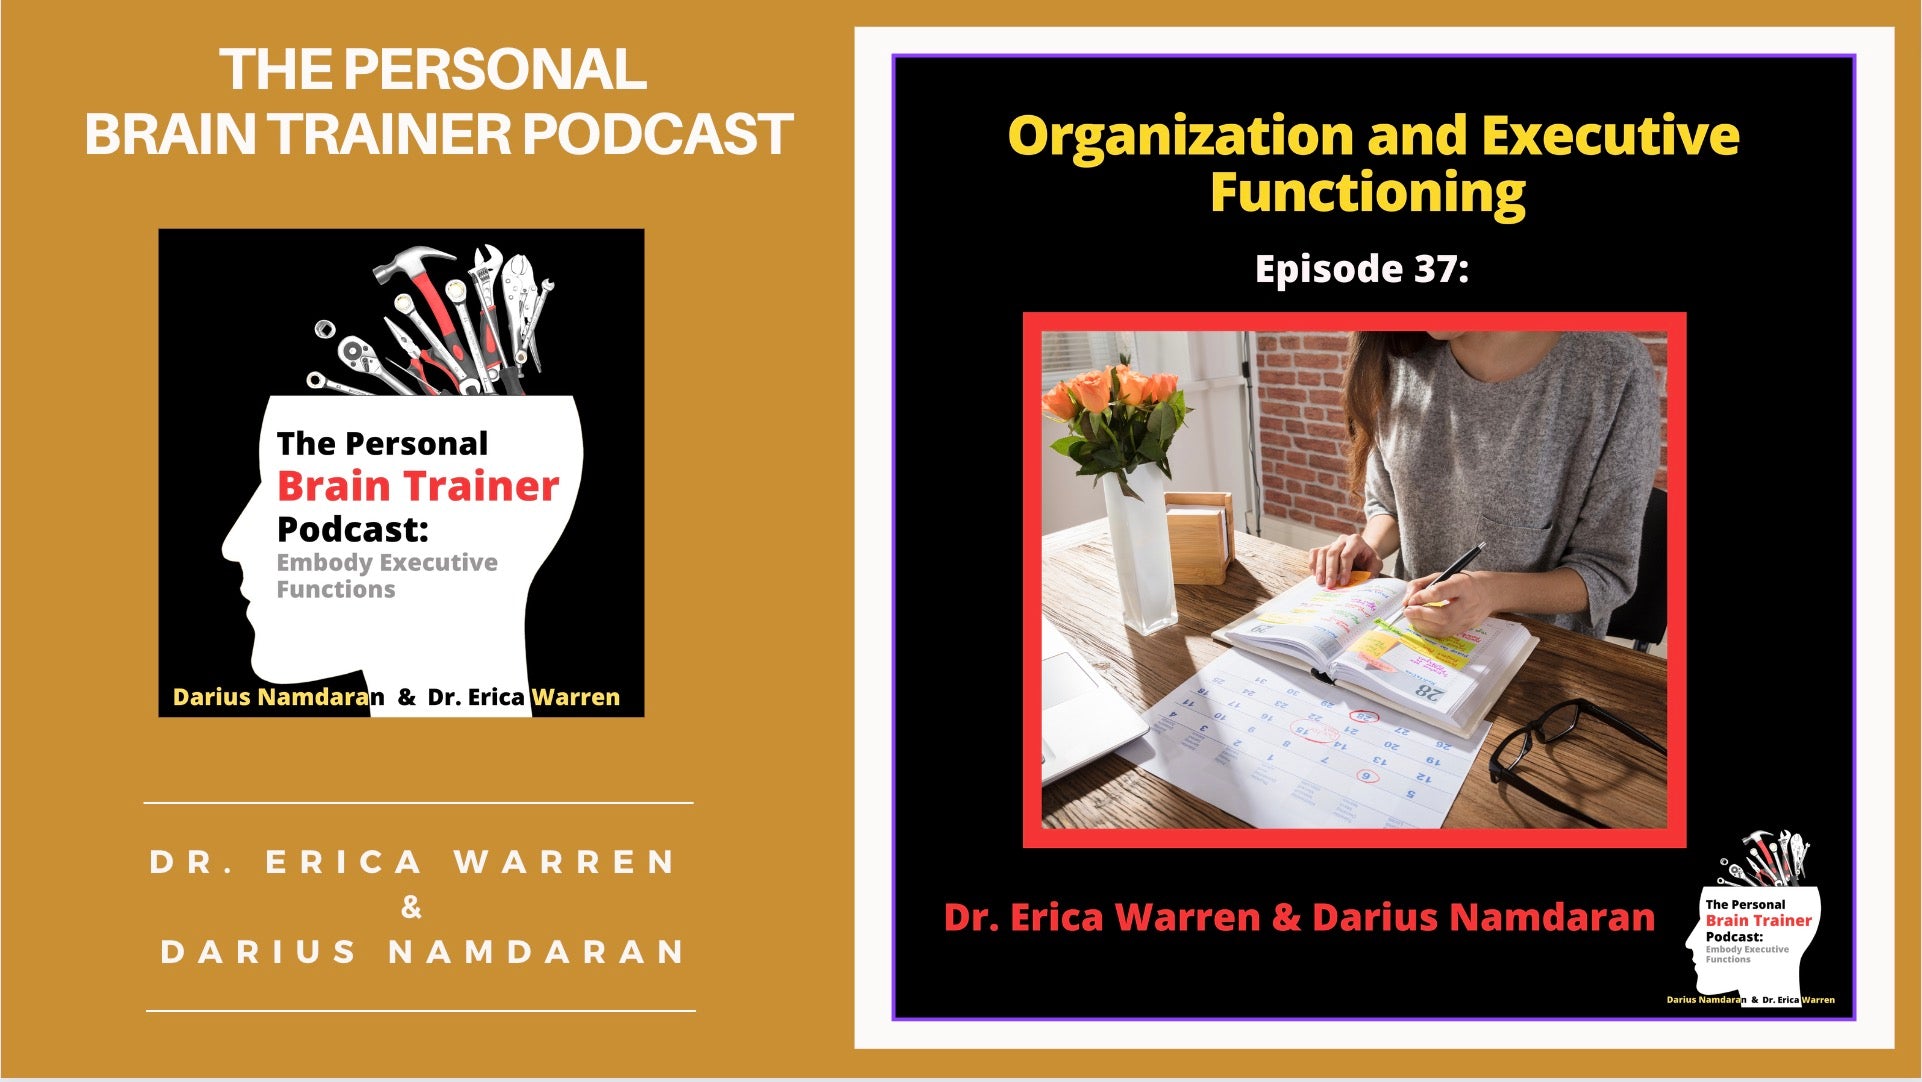 Episode 37 of the personal brain trainer podcast